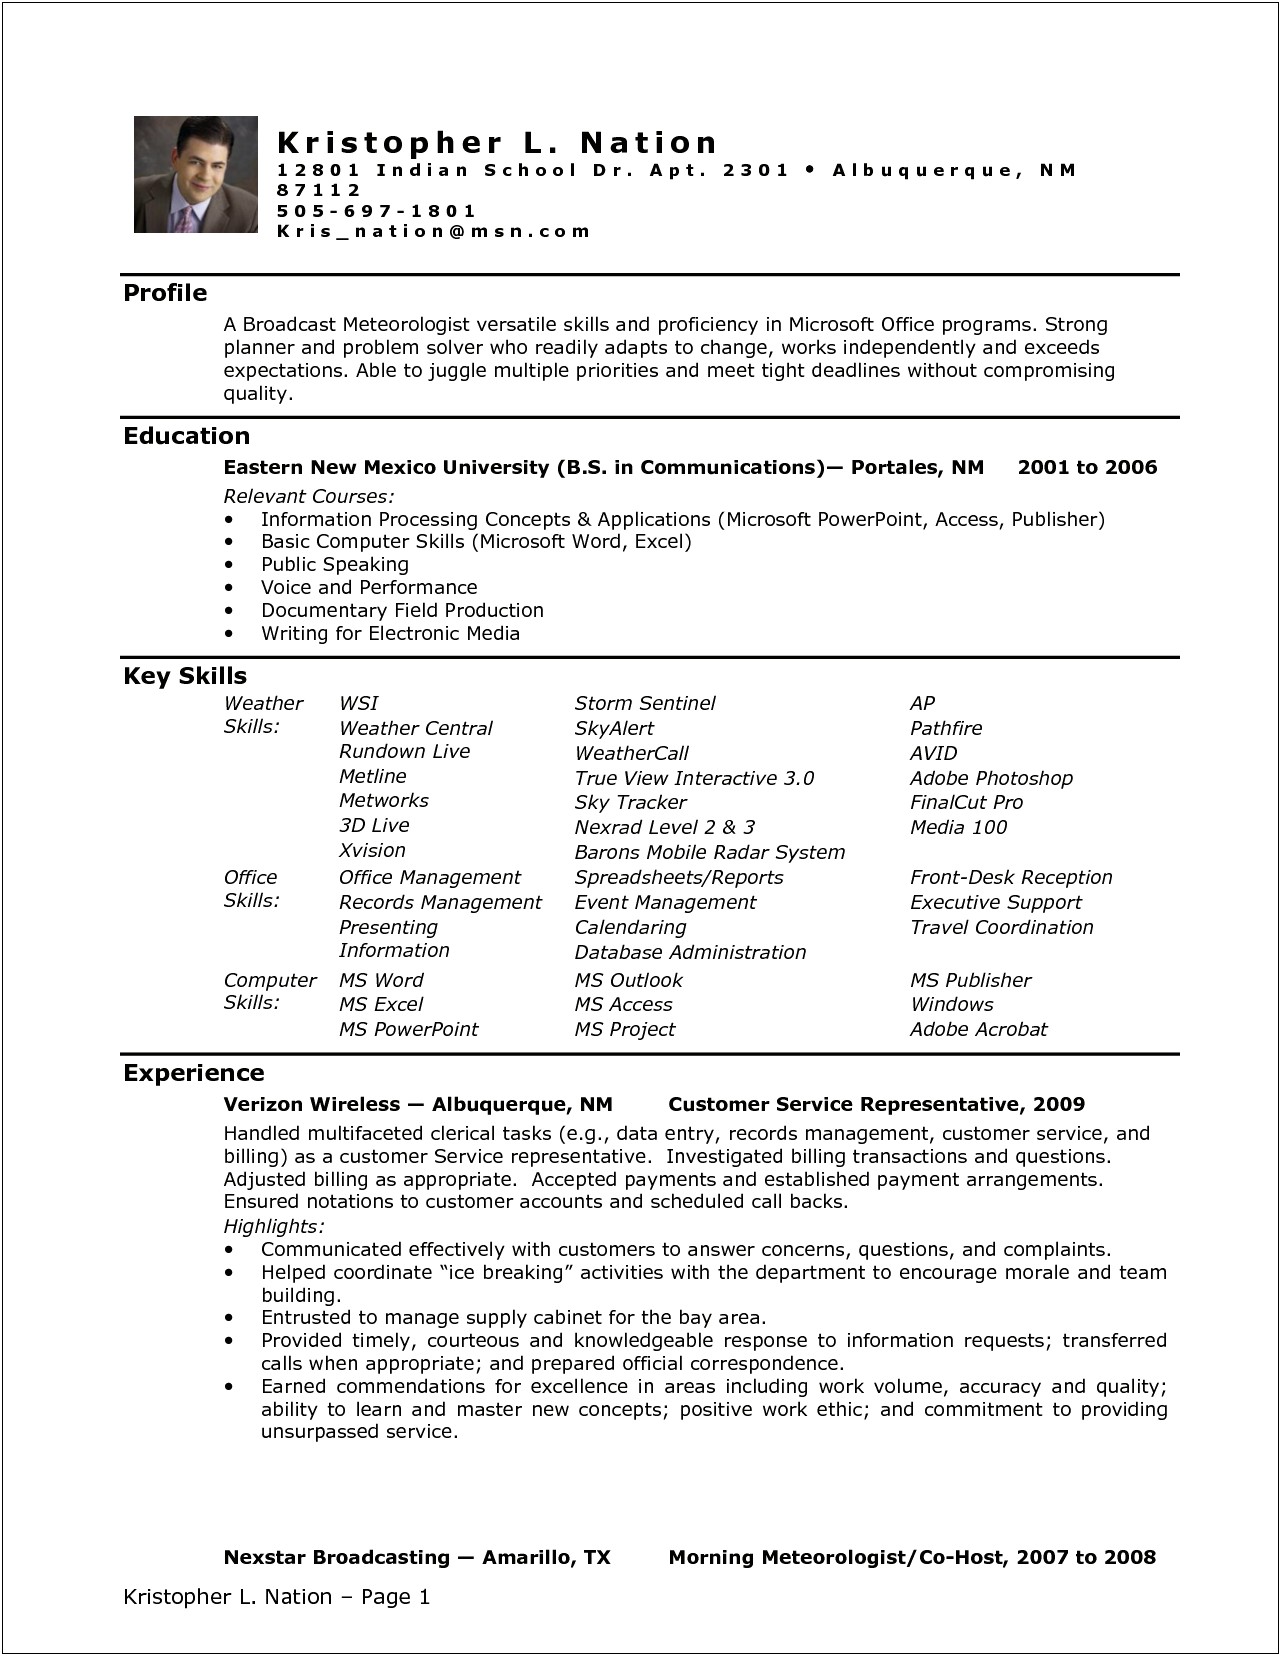 Resume Objective Statement Examples For Medical Assistant